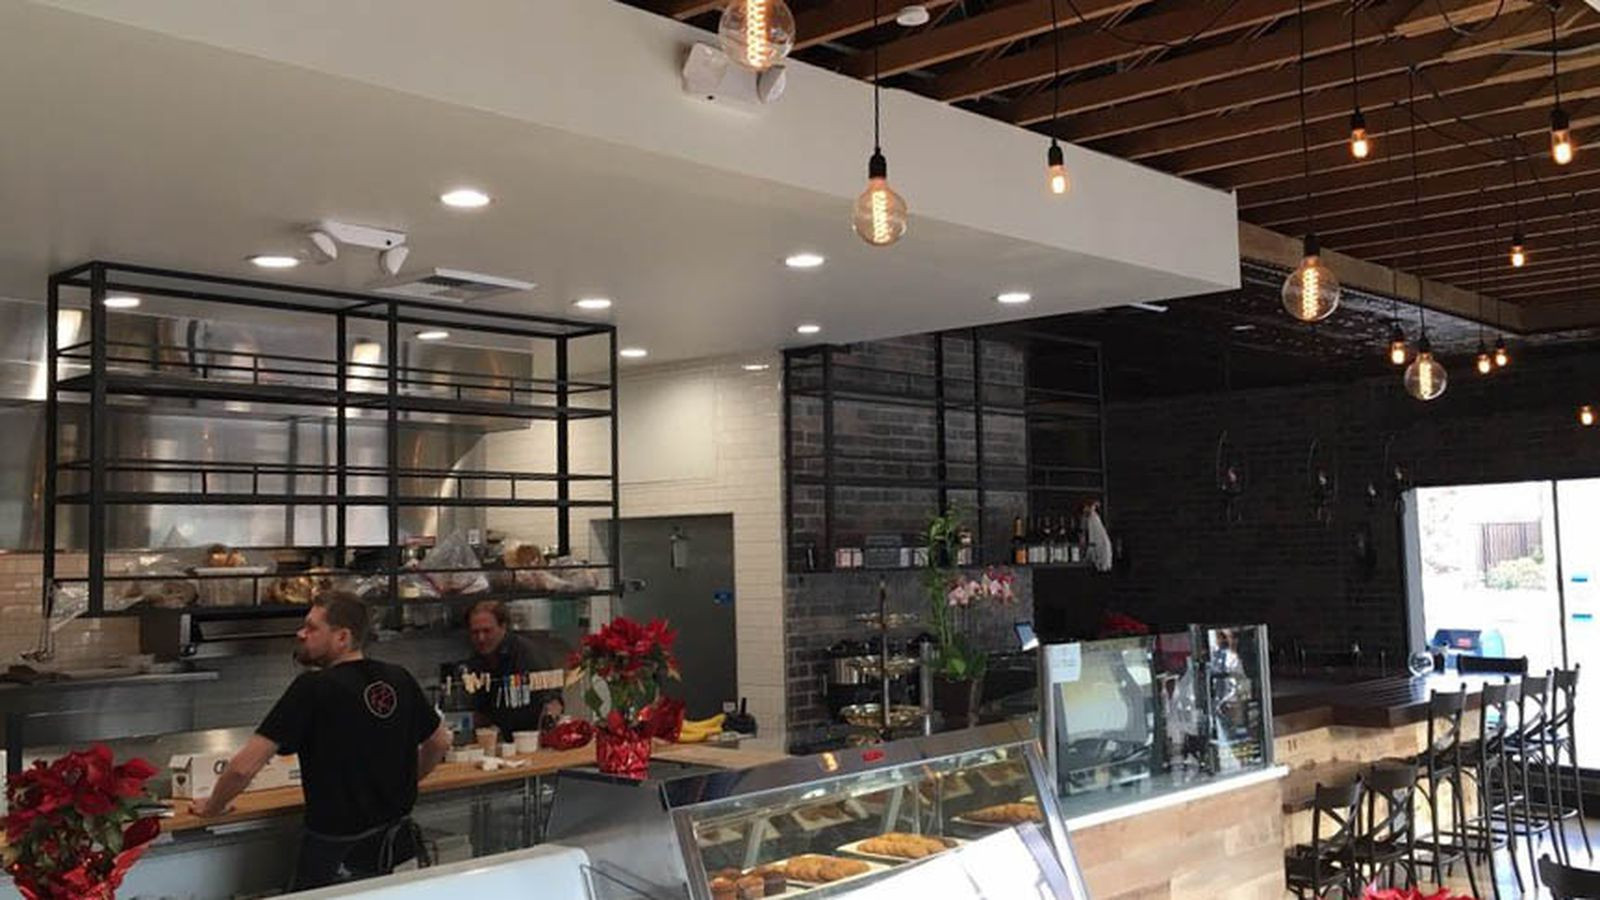 Rustic Kitchen Mar Vista
 Rustic Kitchen’s fort Food Marketplace Now Open in Mar